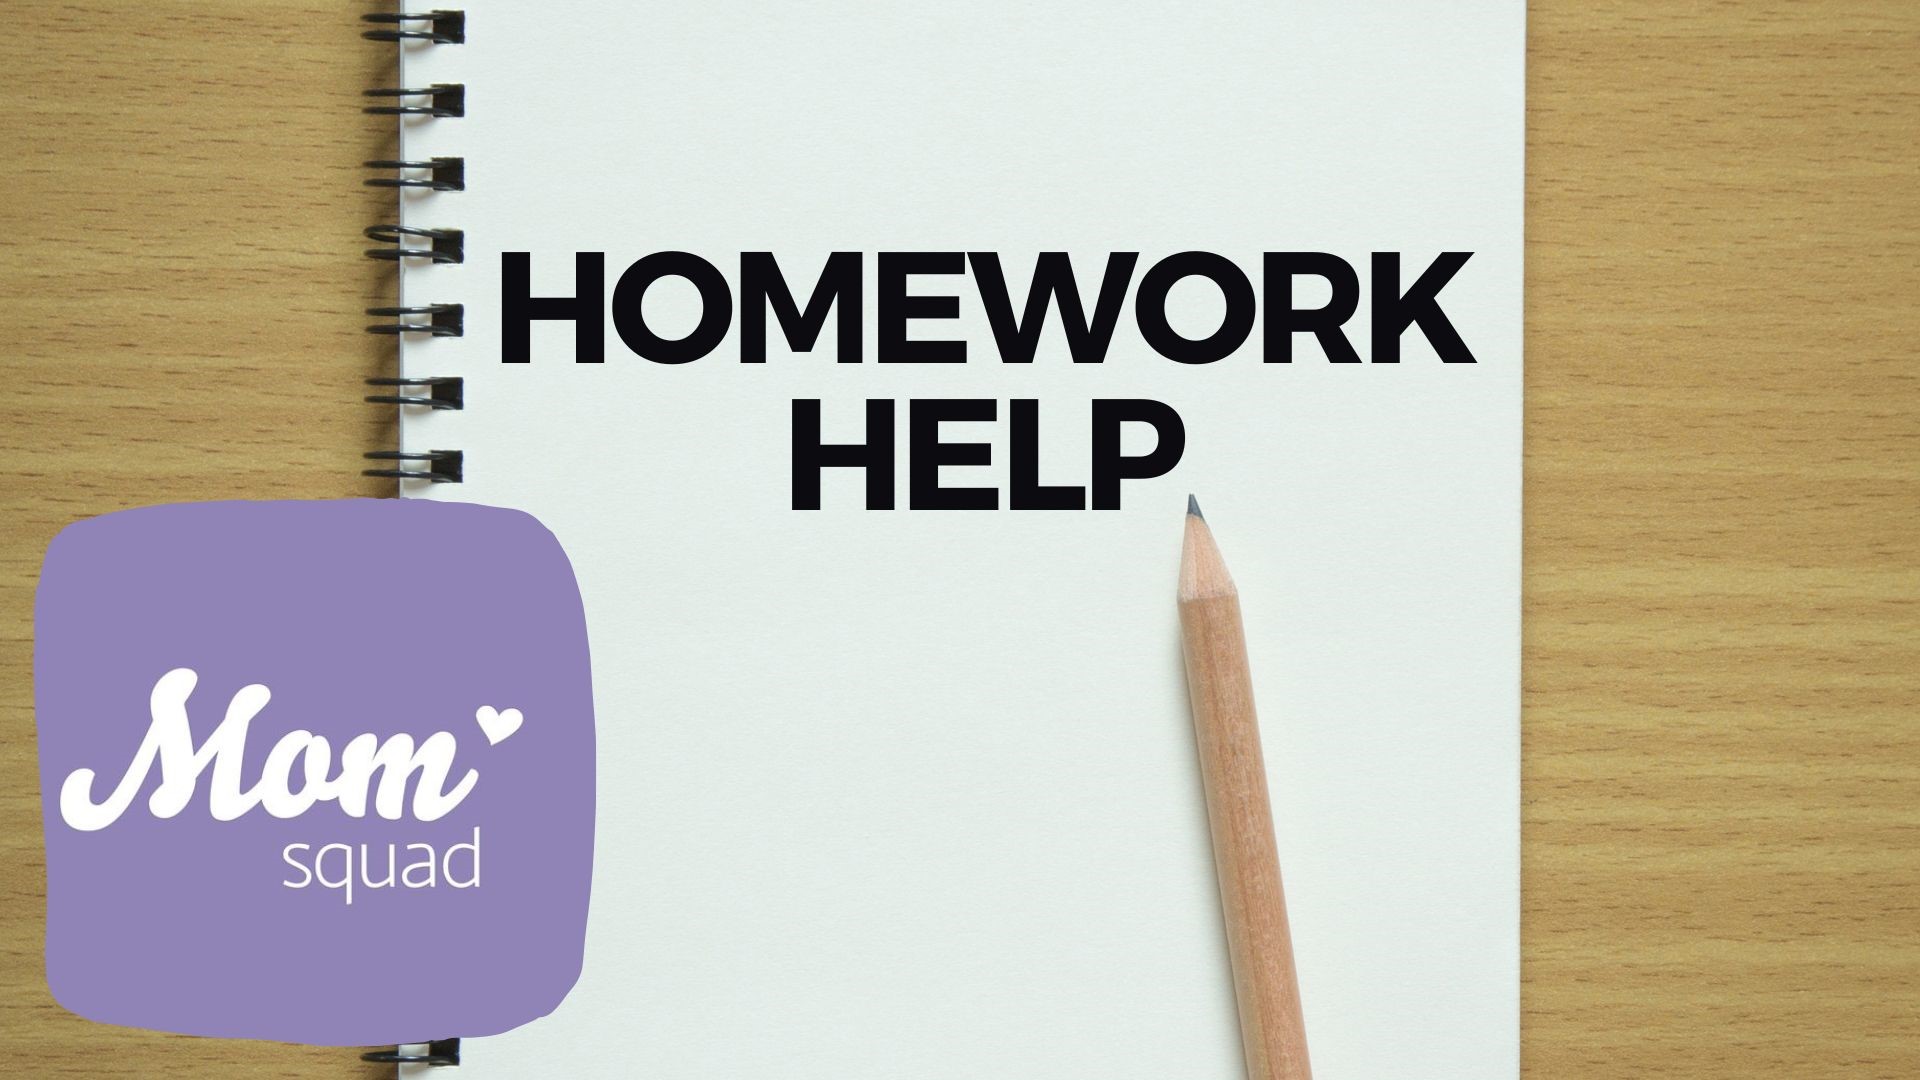 WKYC's Maureen Kyle shares advice from a parenting educator on how to best help your kids with homework, as well as talks about homework struggles with another mom.